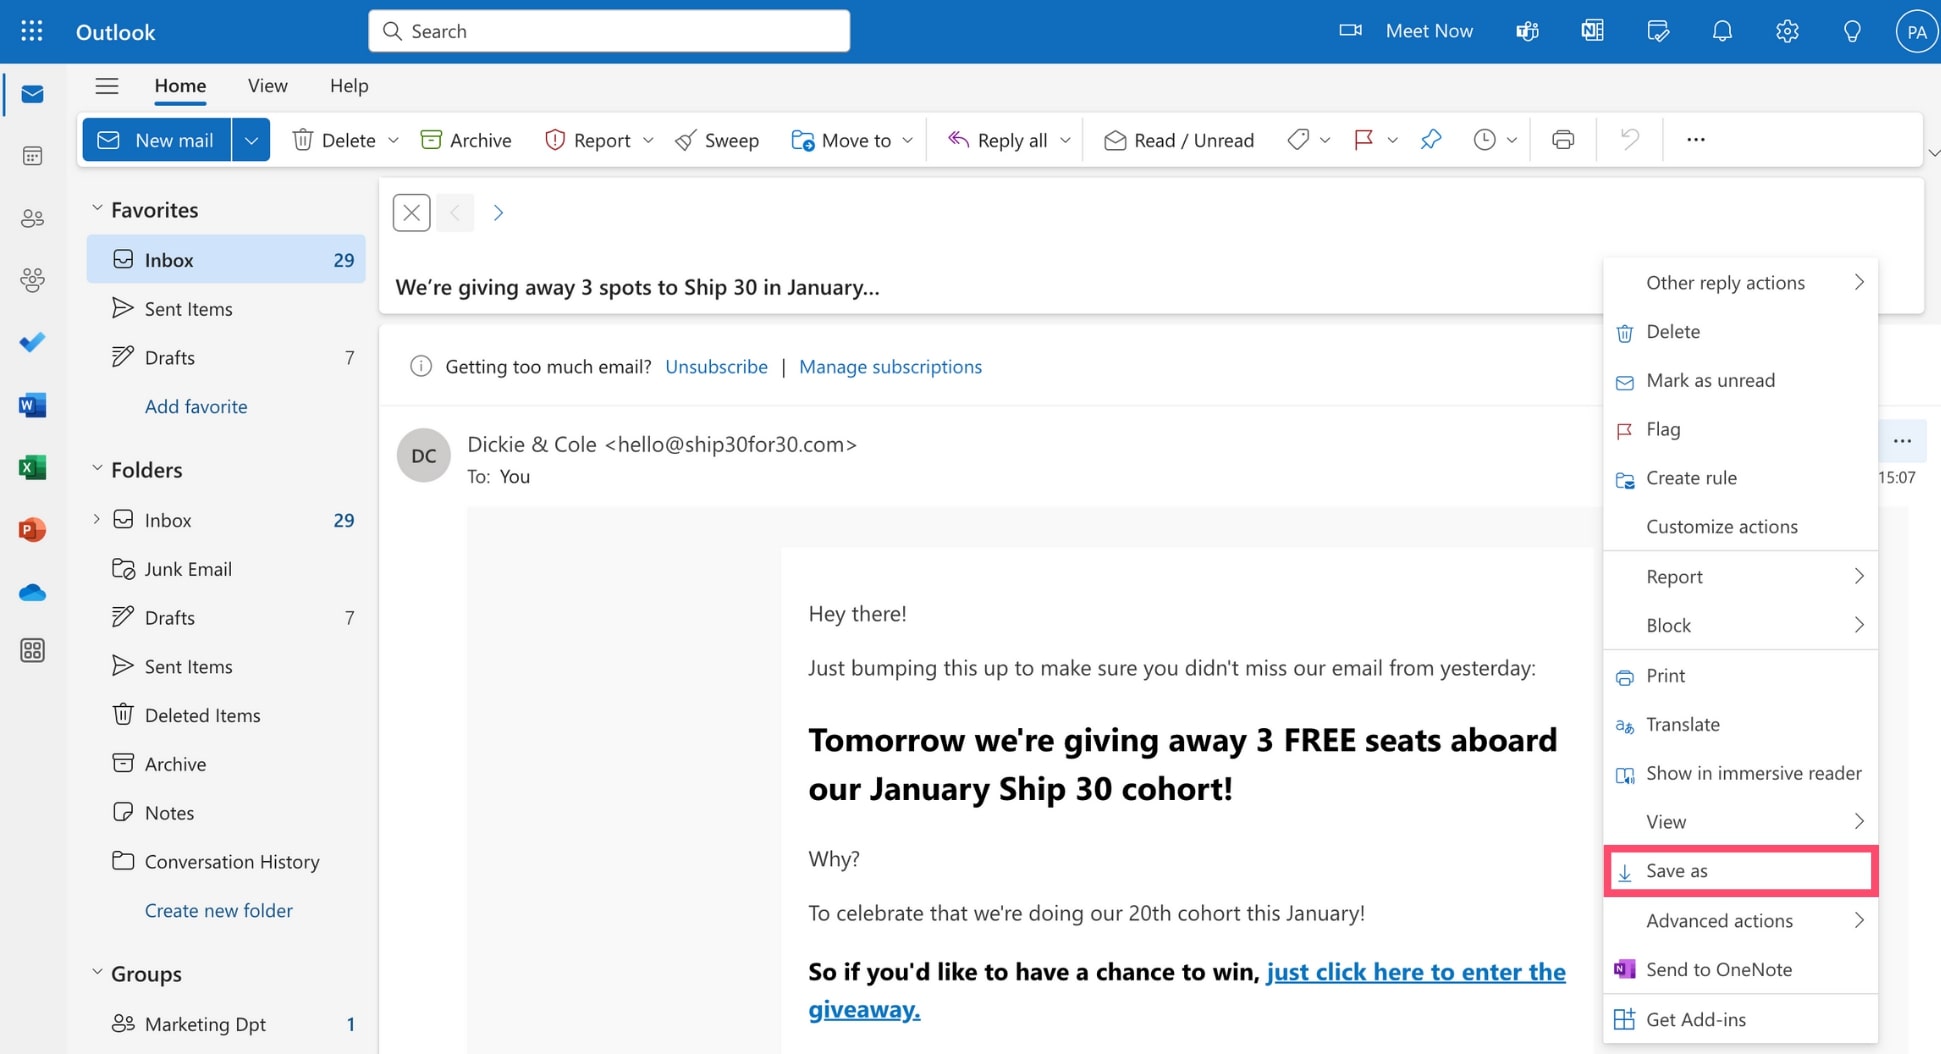 Download Outlook mail and make a local copy on your device